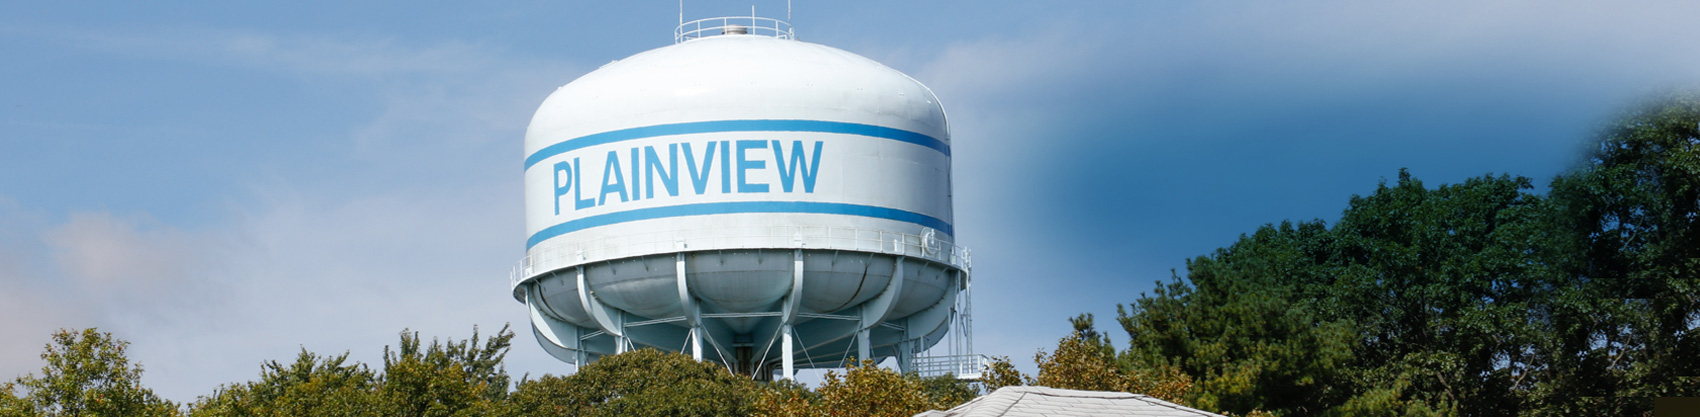 Delivering a High-Quality, Reliable Water Supply